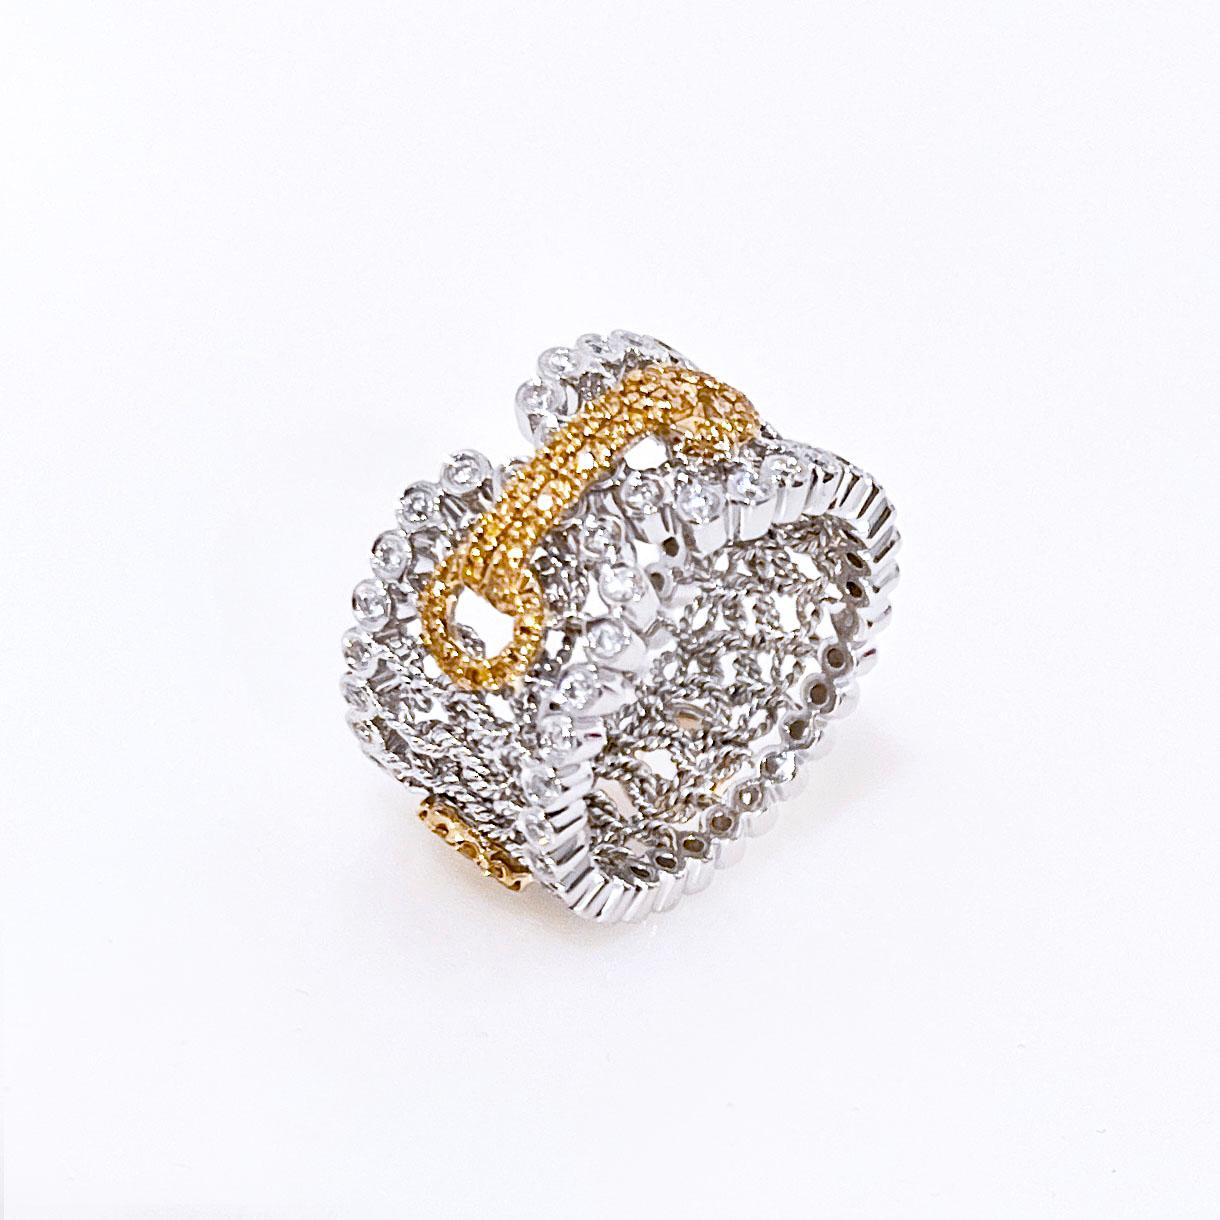 Vitolo 18 Karat Gold Handmade Gold Links Ring with White and Yellow Diamonds In New Condition For Sale In Los Angeles, CA